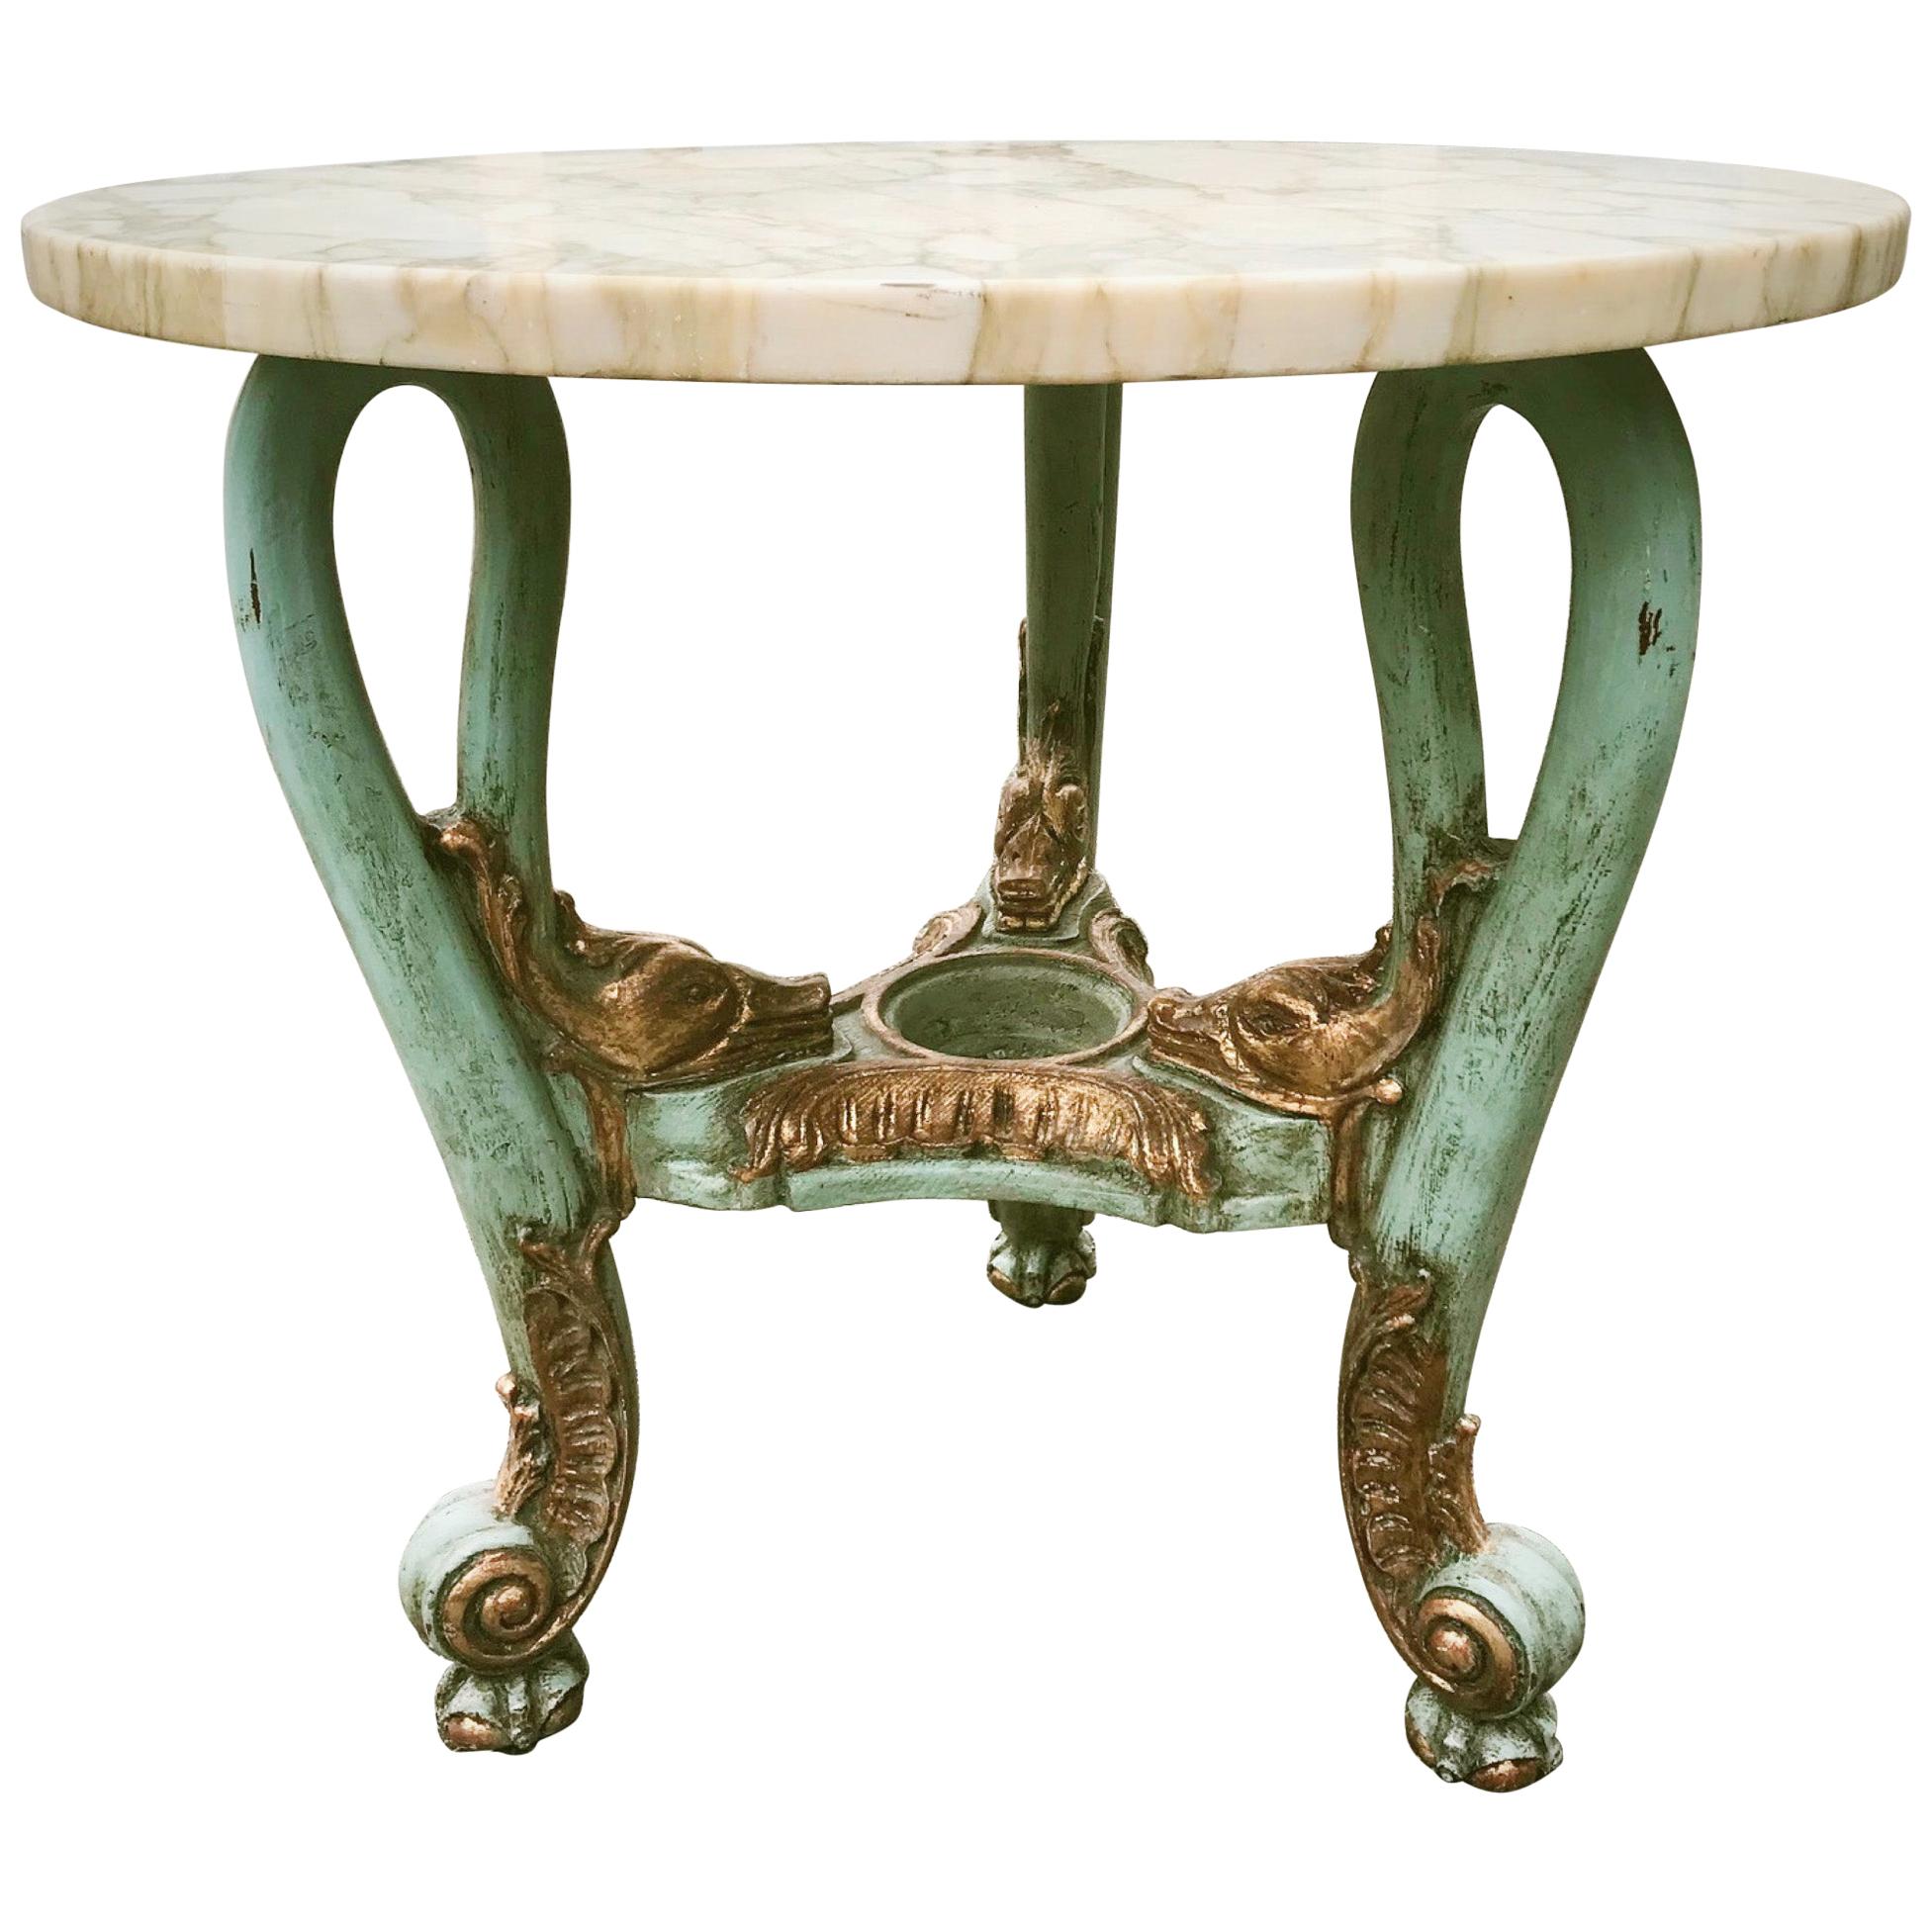 Early 20th Century Venetian Occasional Table Carved, Polychrome with Marble Top